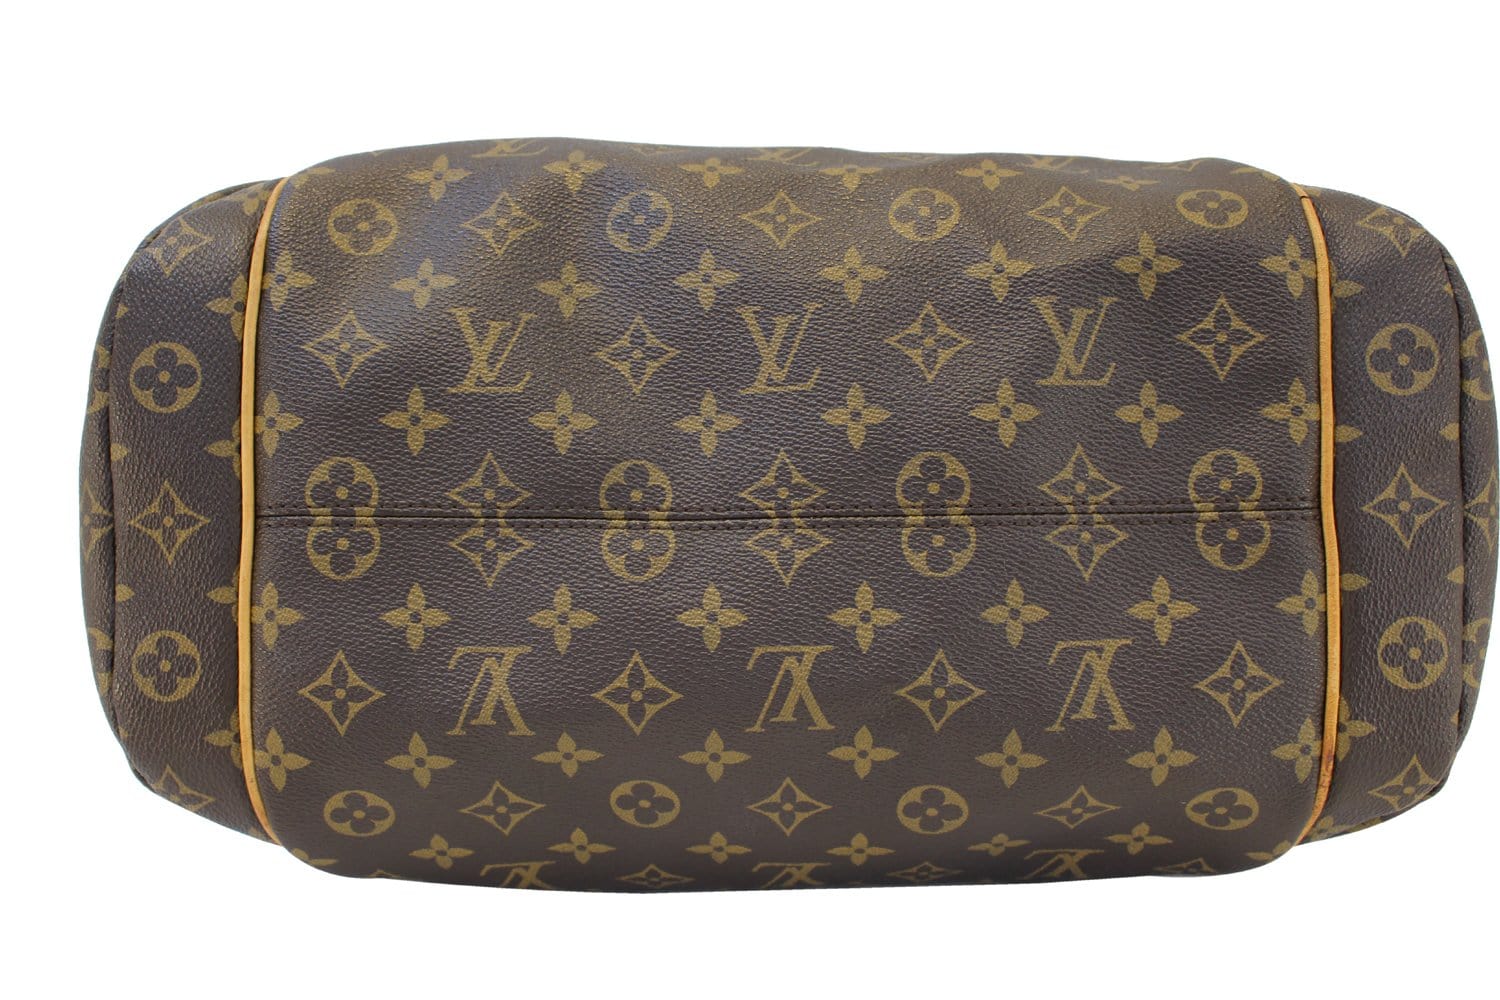 LOUIS VUITTON, Totally Checkered Canvas Bag sold at auction on 7th December